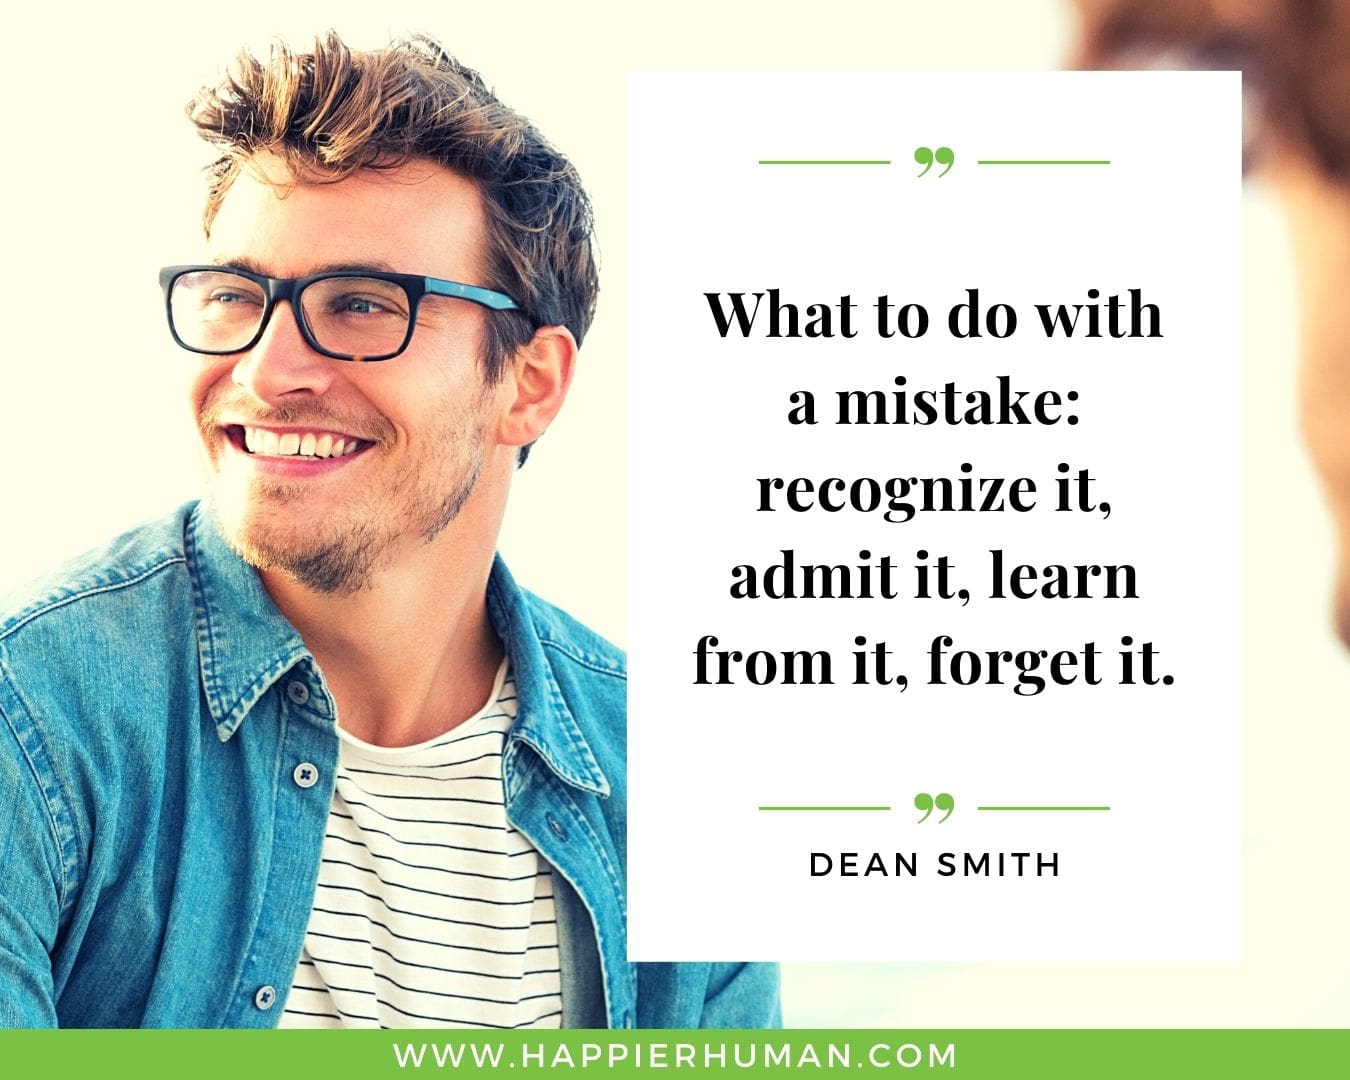 Overthinking Quotes - “What do do with a mistake: recognize it, admit it, learn from it, forget it.” - Dean Smith